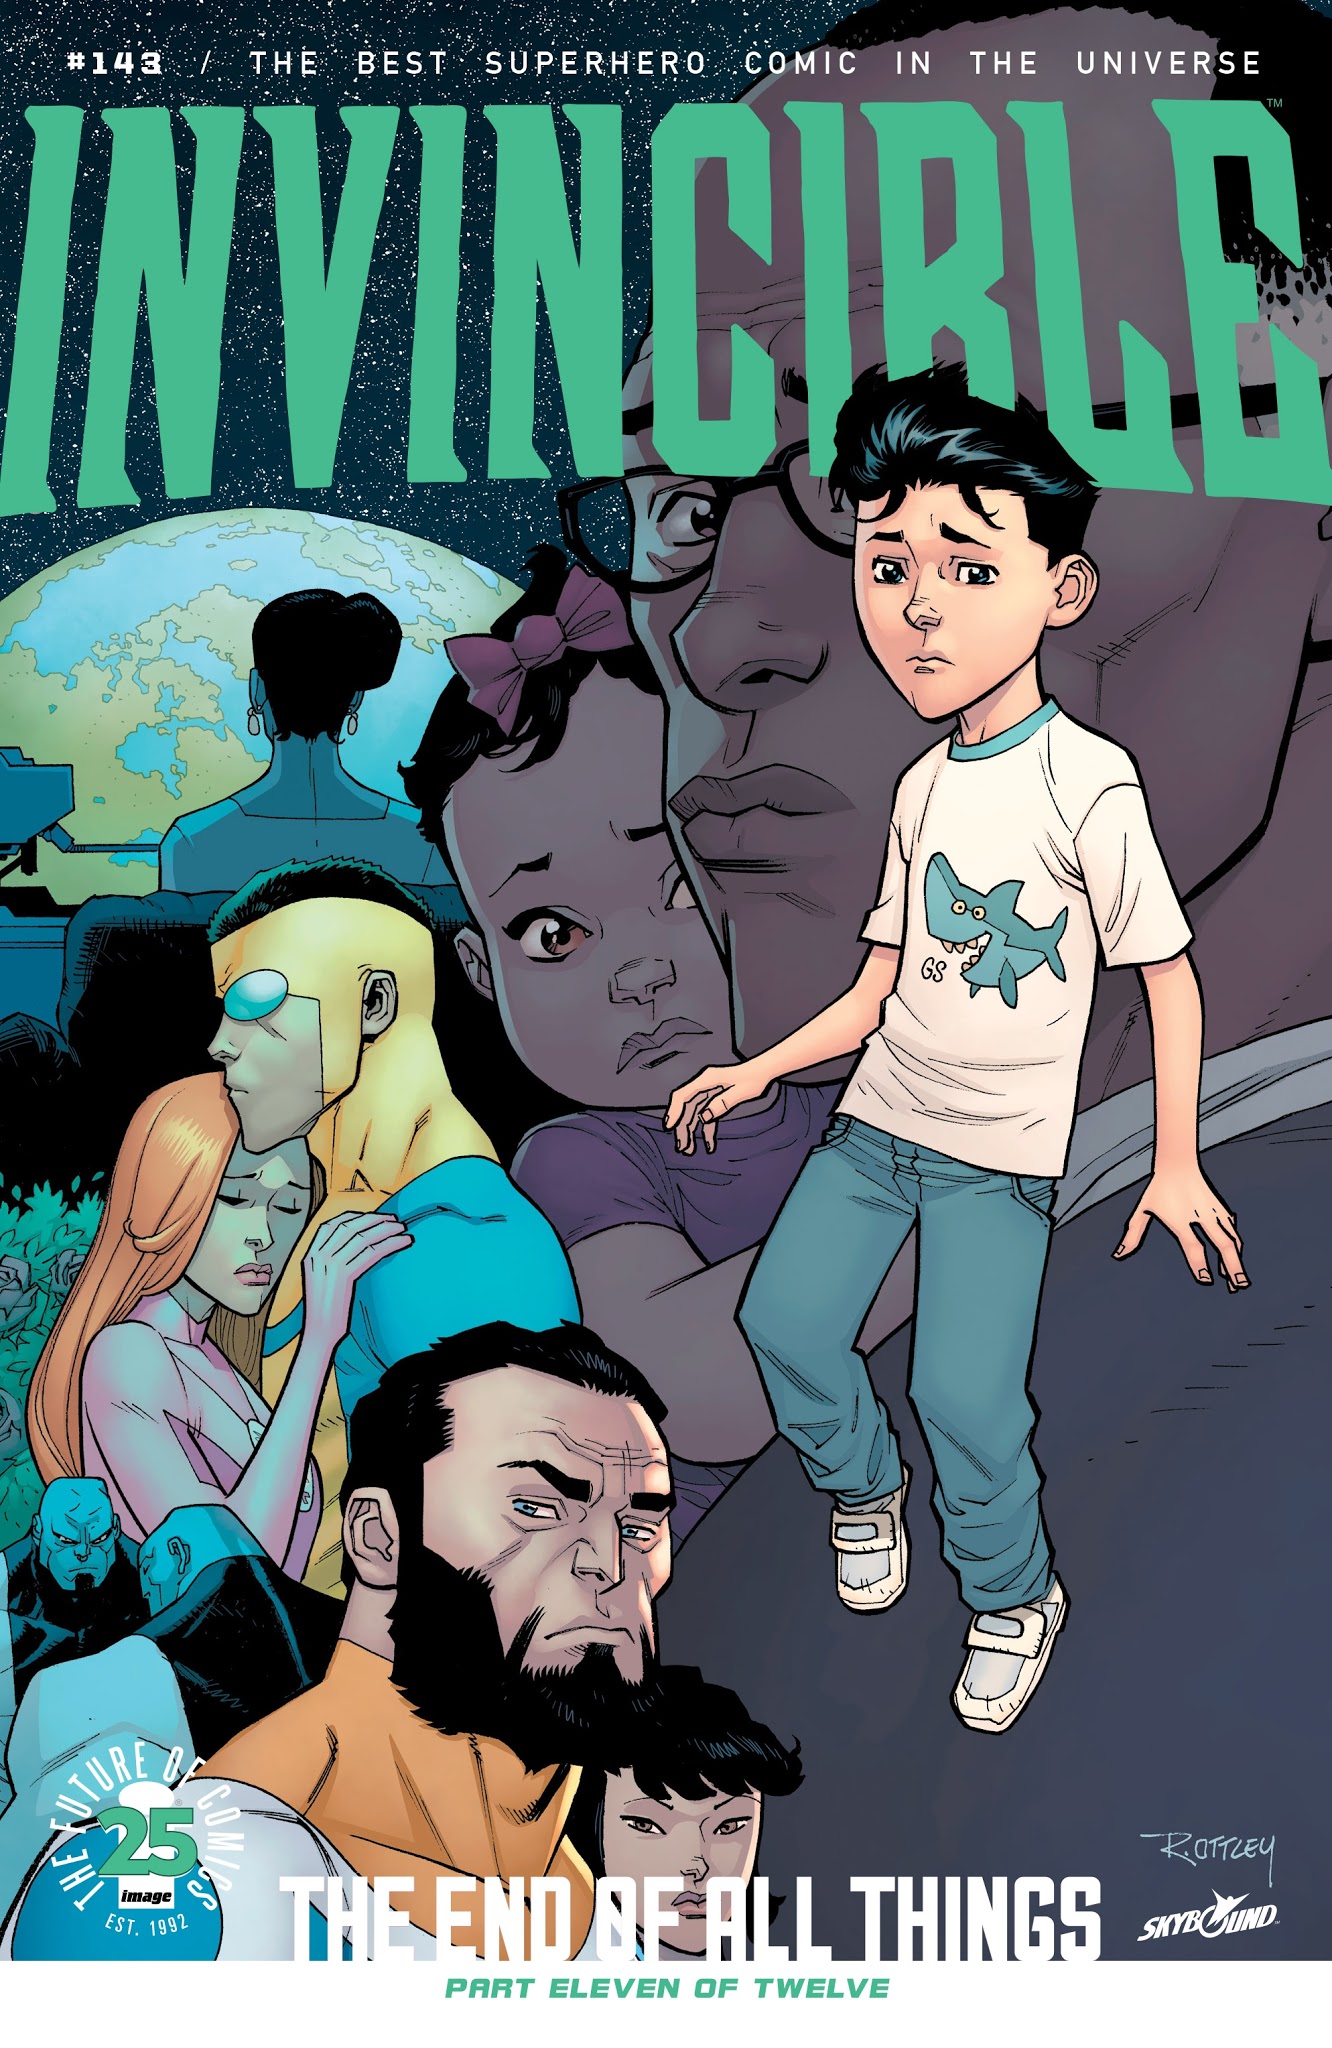 Read online Invincible comic -  Issue #143 - 1